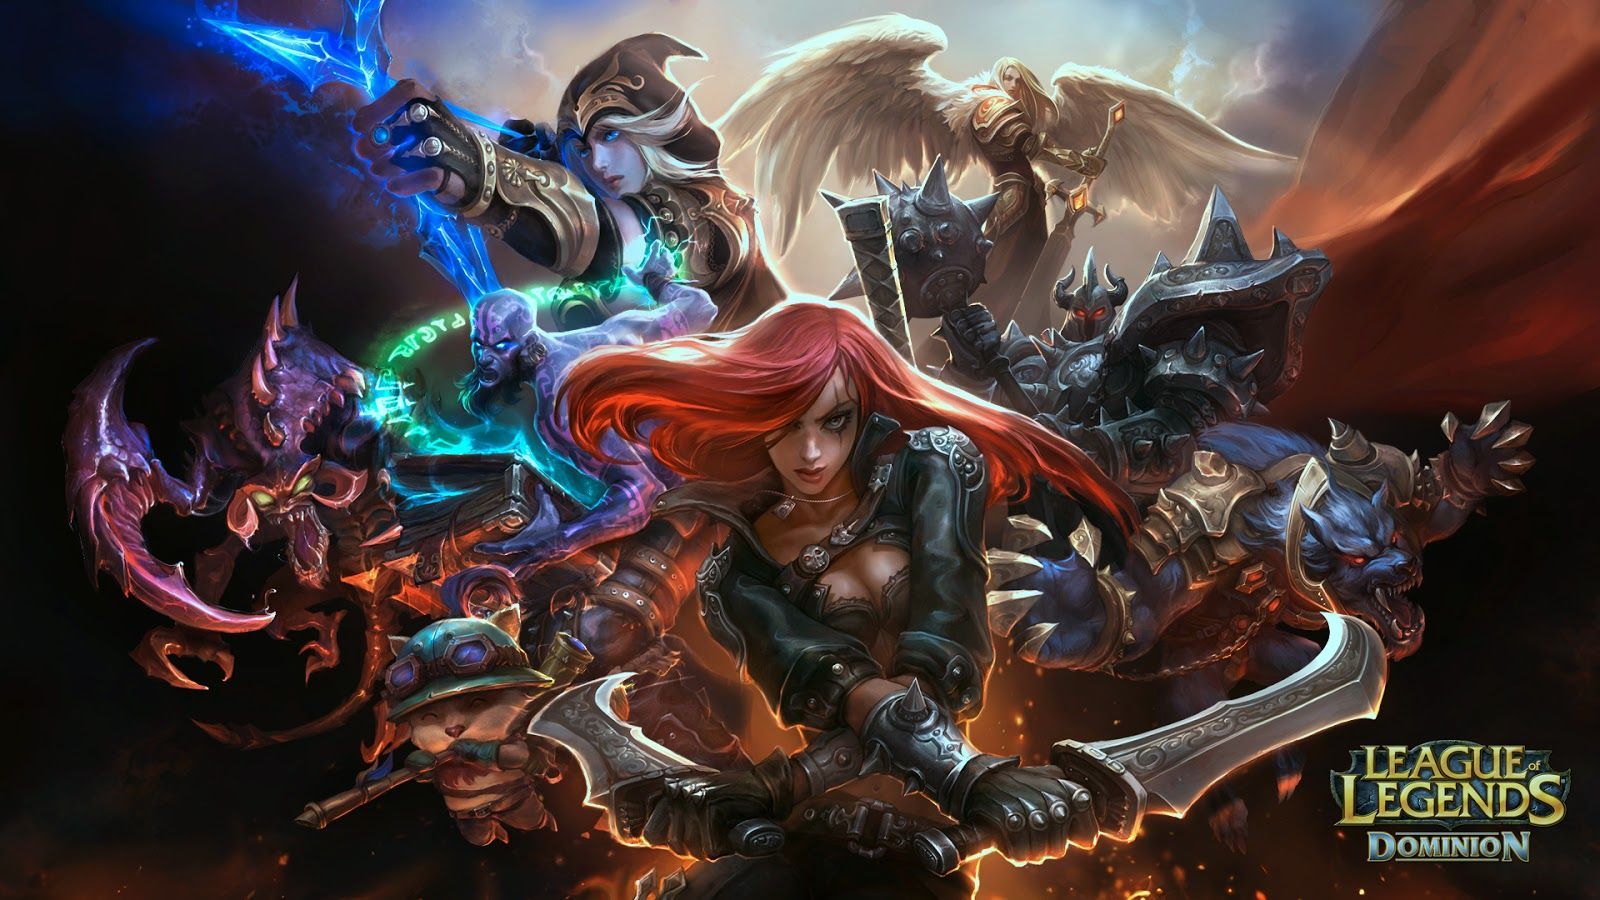 League Of Legends Wallpaper and Cover Photos BLG